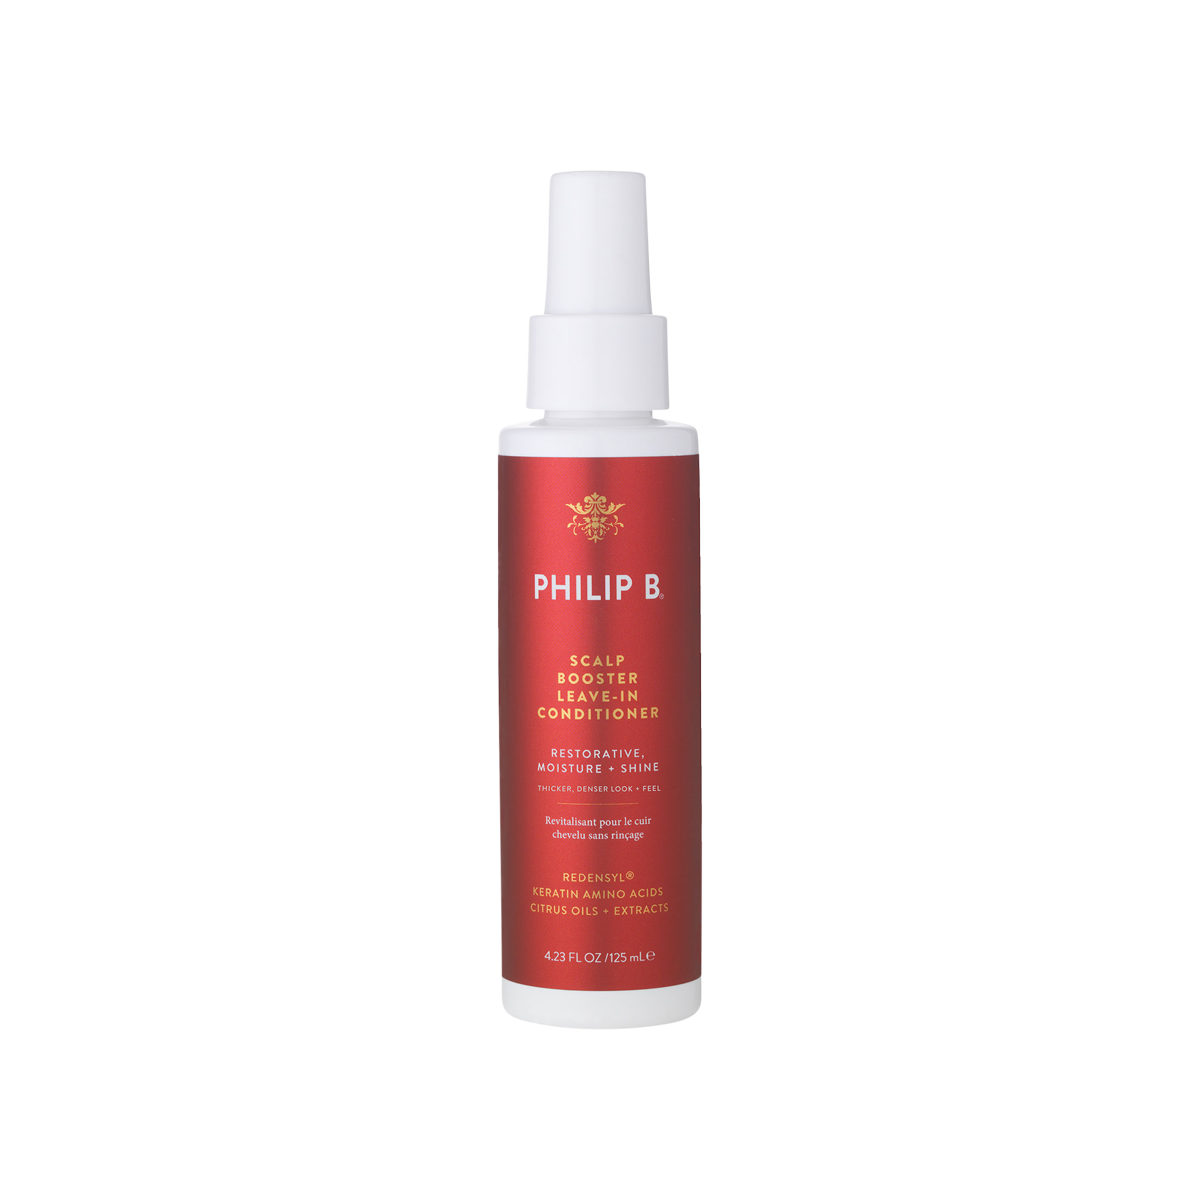 Philip B - Scalp Booster Leave-In-Conditioner